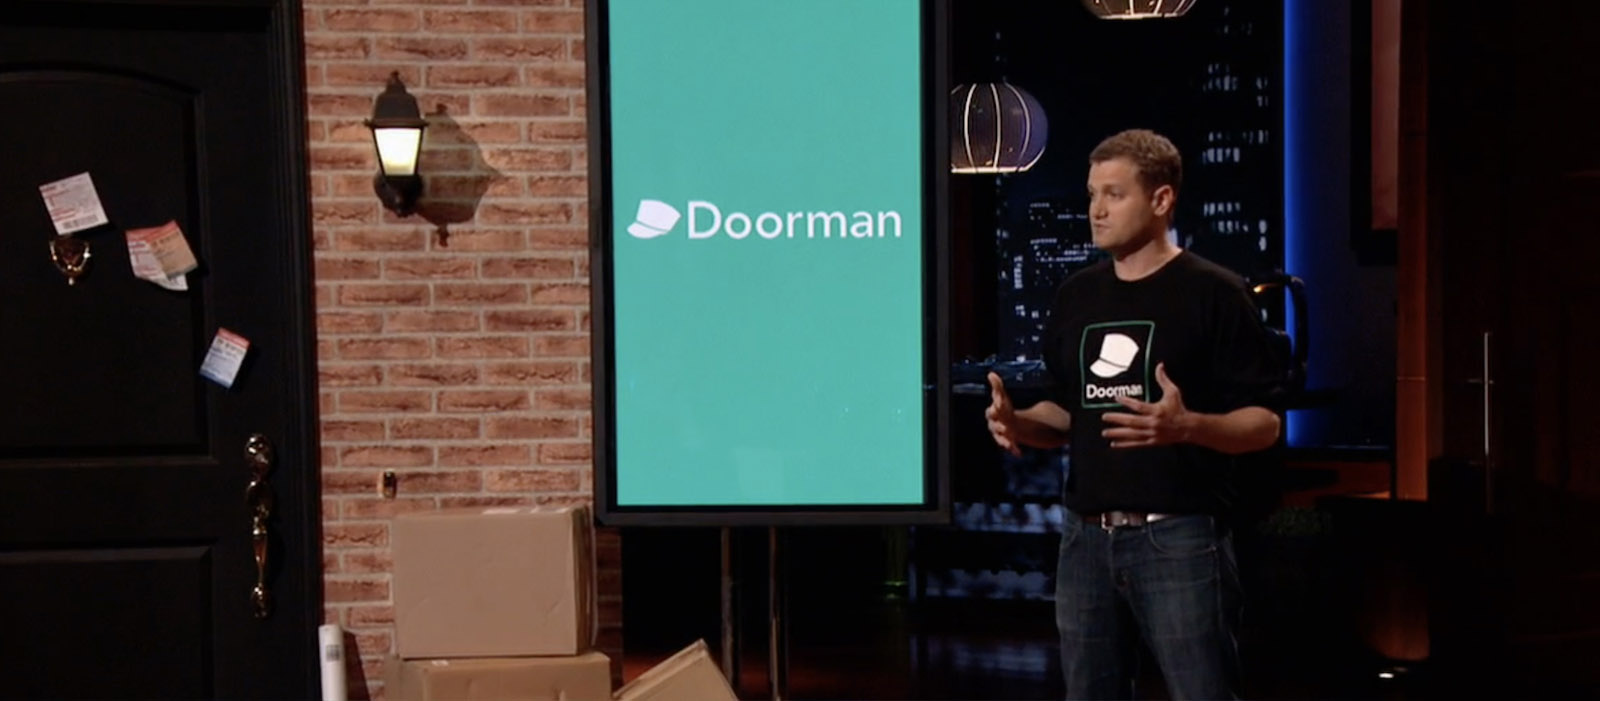 Doorman Product Delivery & Fulfillment Shark Tank Founder